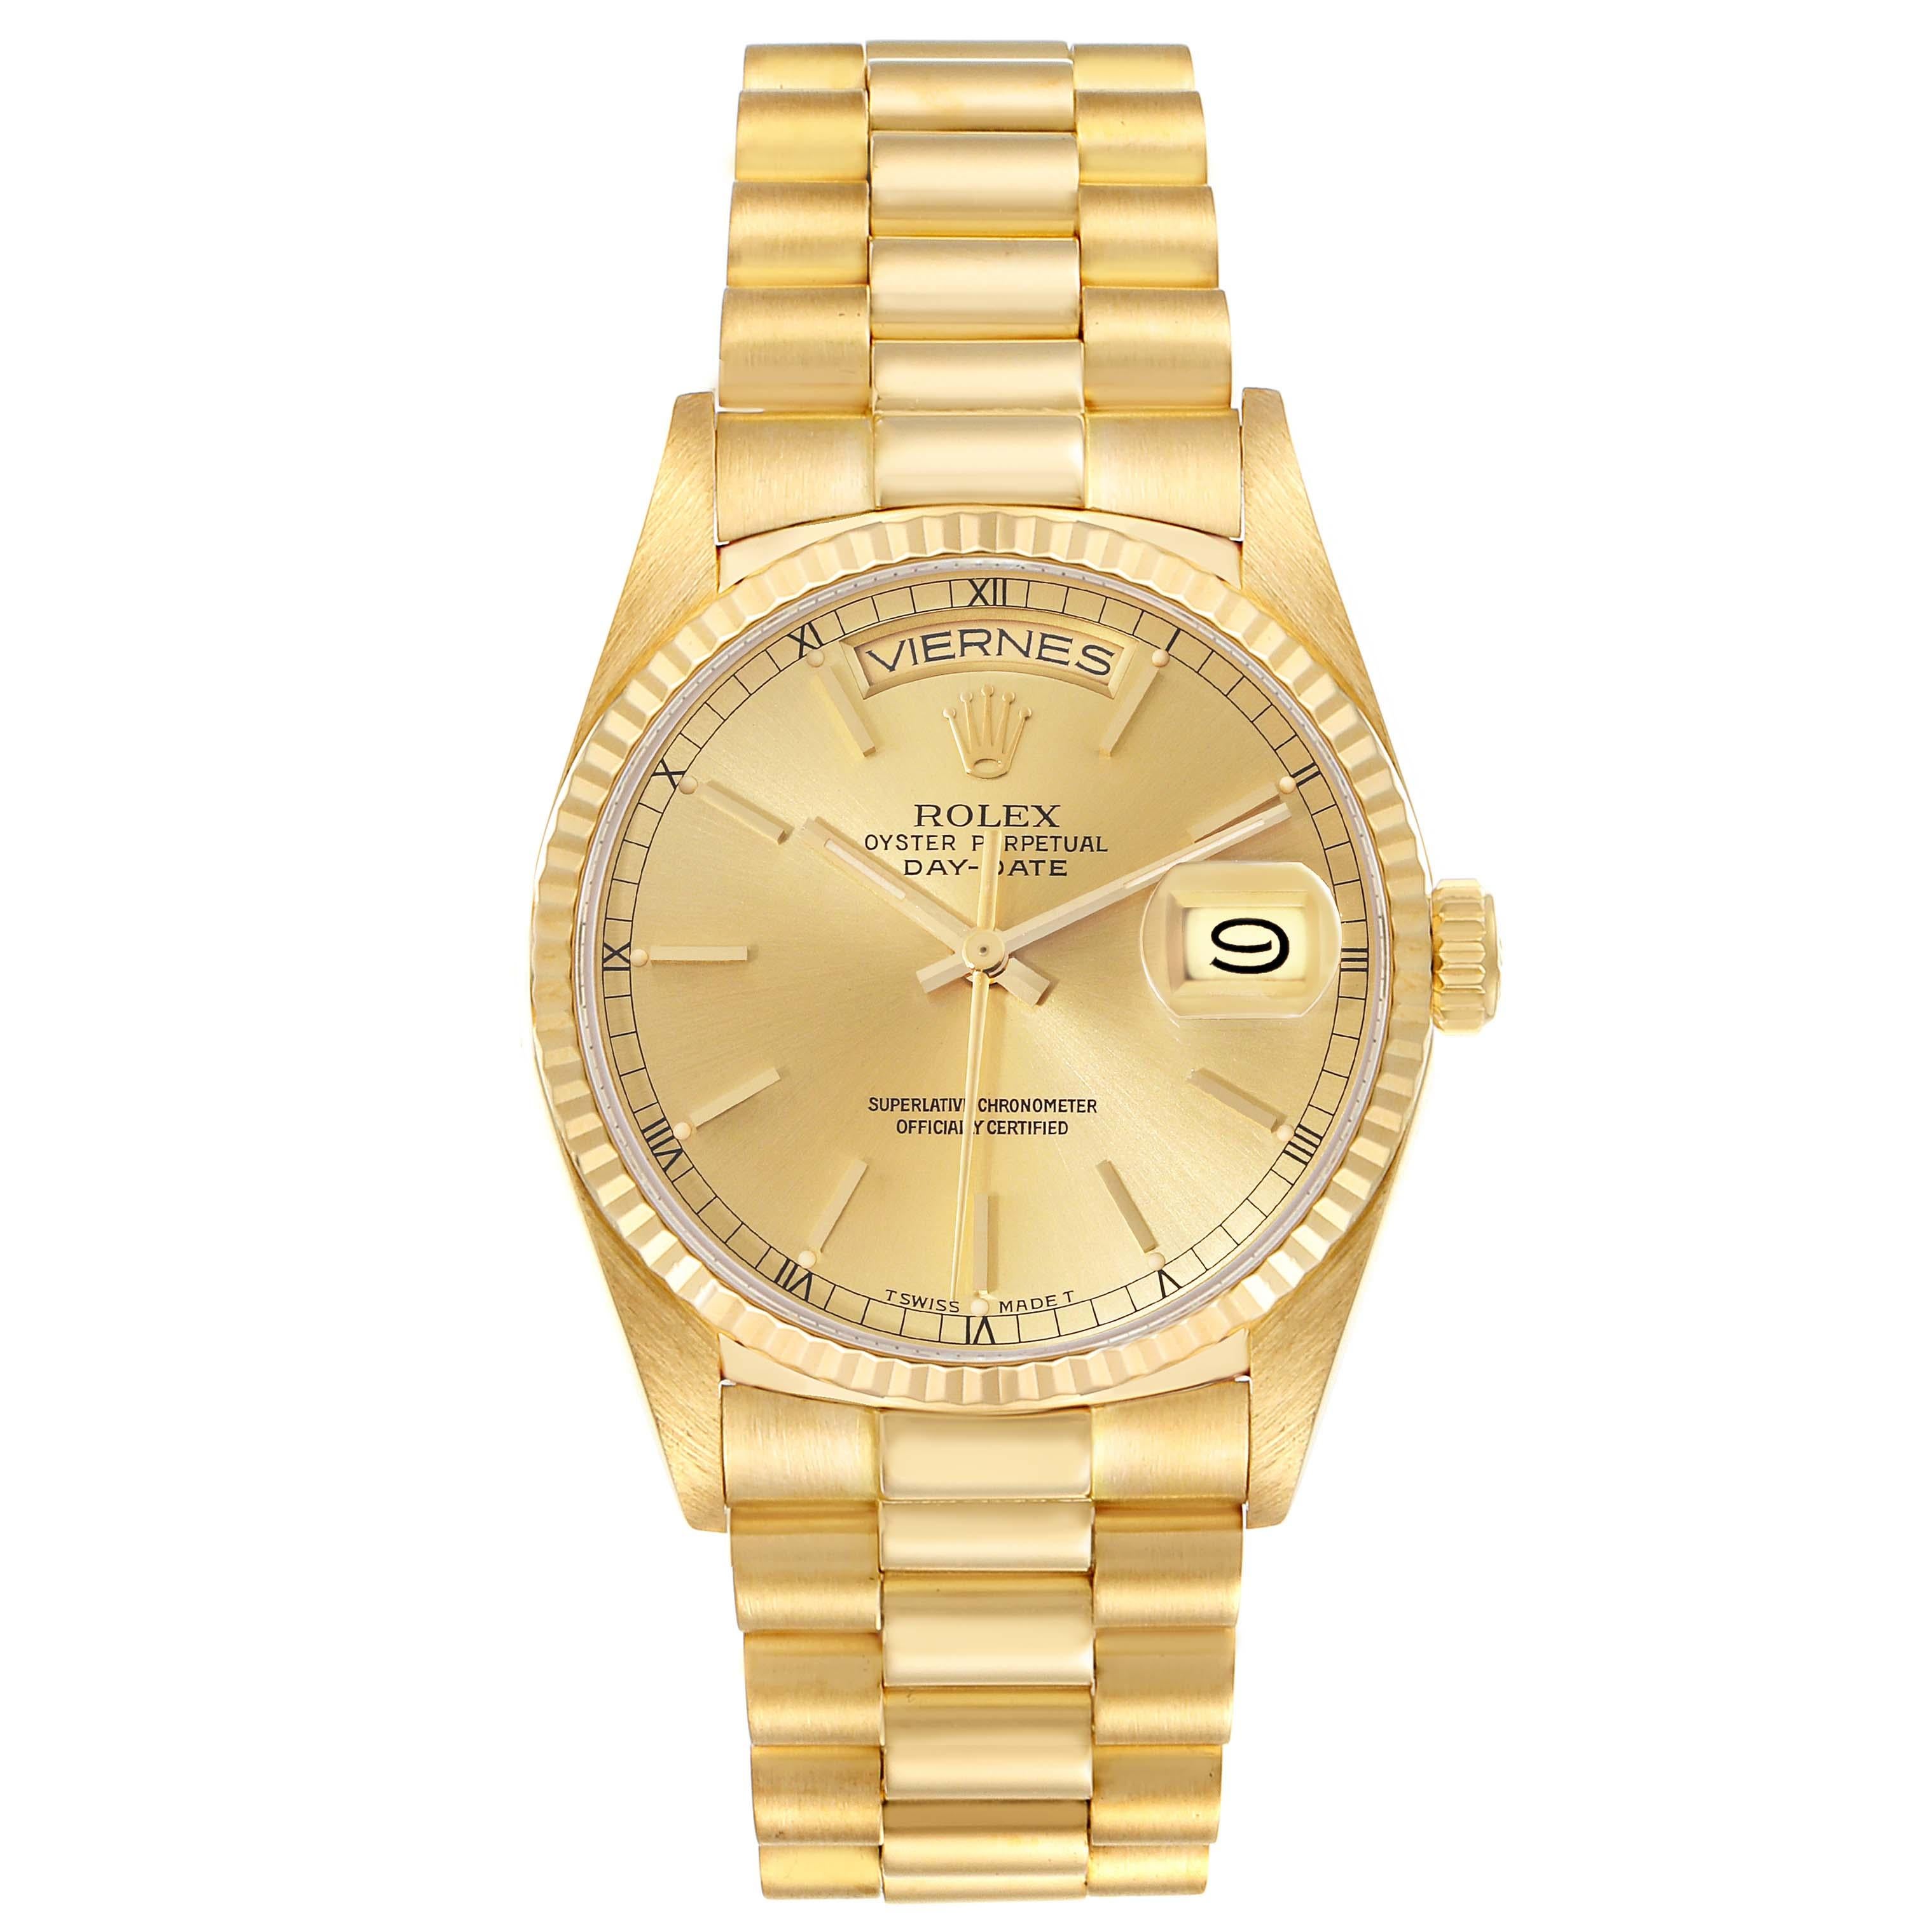 Rolex President Day-Date Yellow Gold Champagne Dial Mens Watch 18038. Officially certified chronometer automatic self-winding movement. 18k yellow gold oyster case 36.0 mm in diameter.  Rolex logo on a crown. 18k yellow gold fluted bezel. Scratch